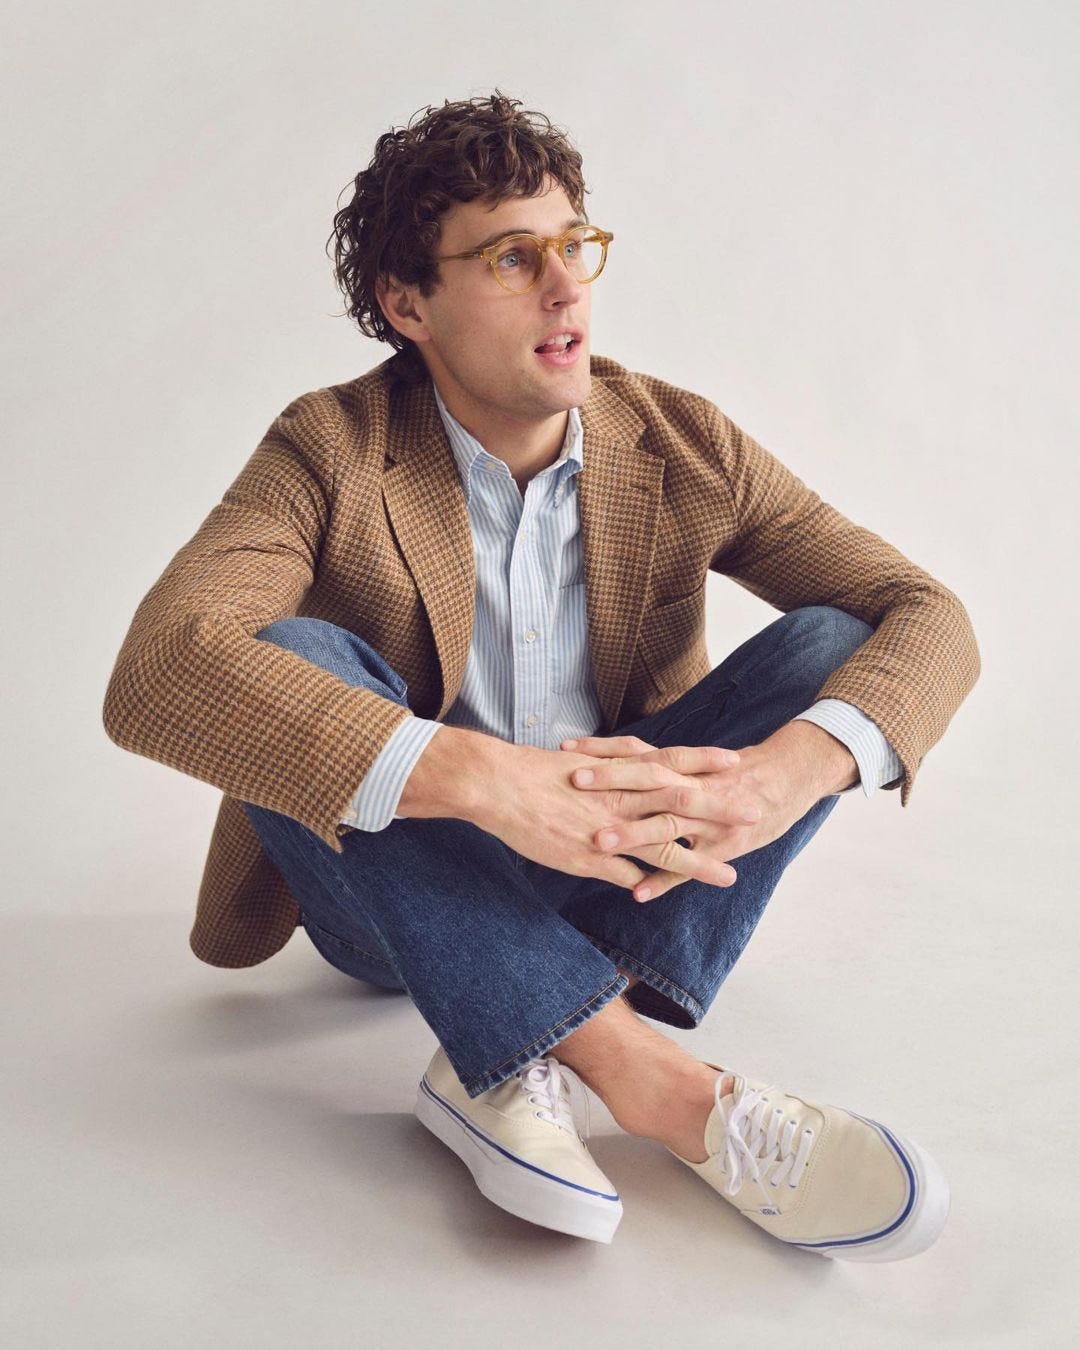 man wearing a blazer and jeans with white canvas sneakers sitting on the floor with his legs crossed